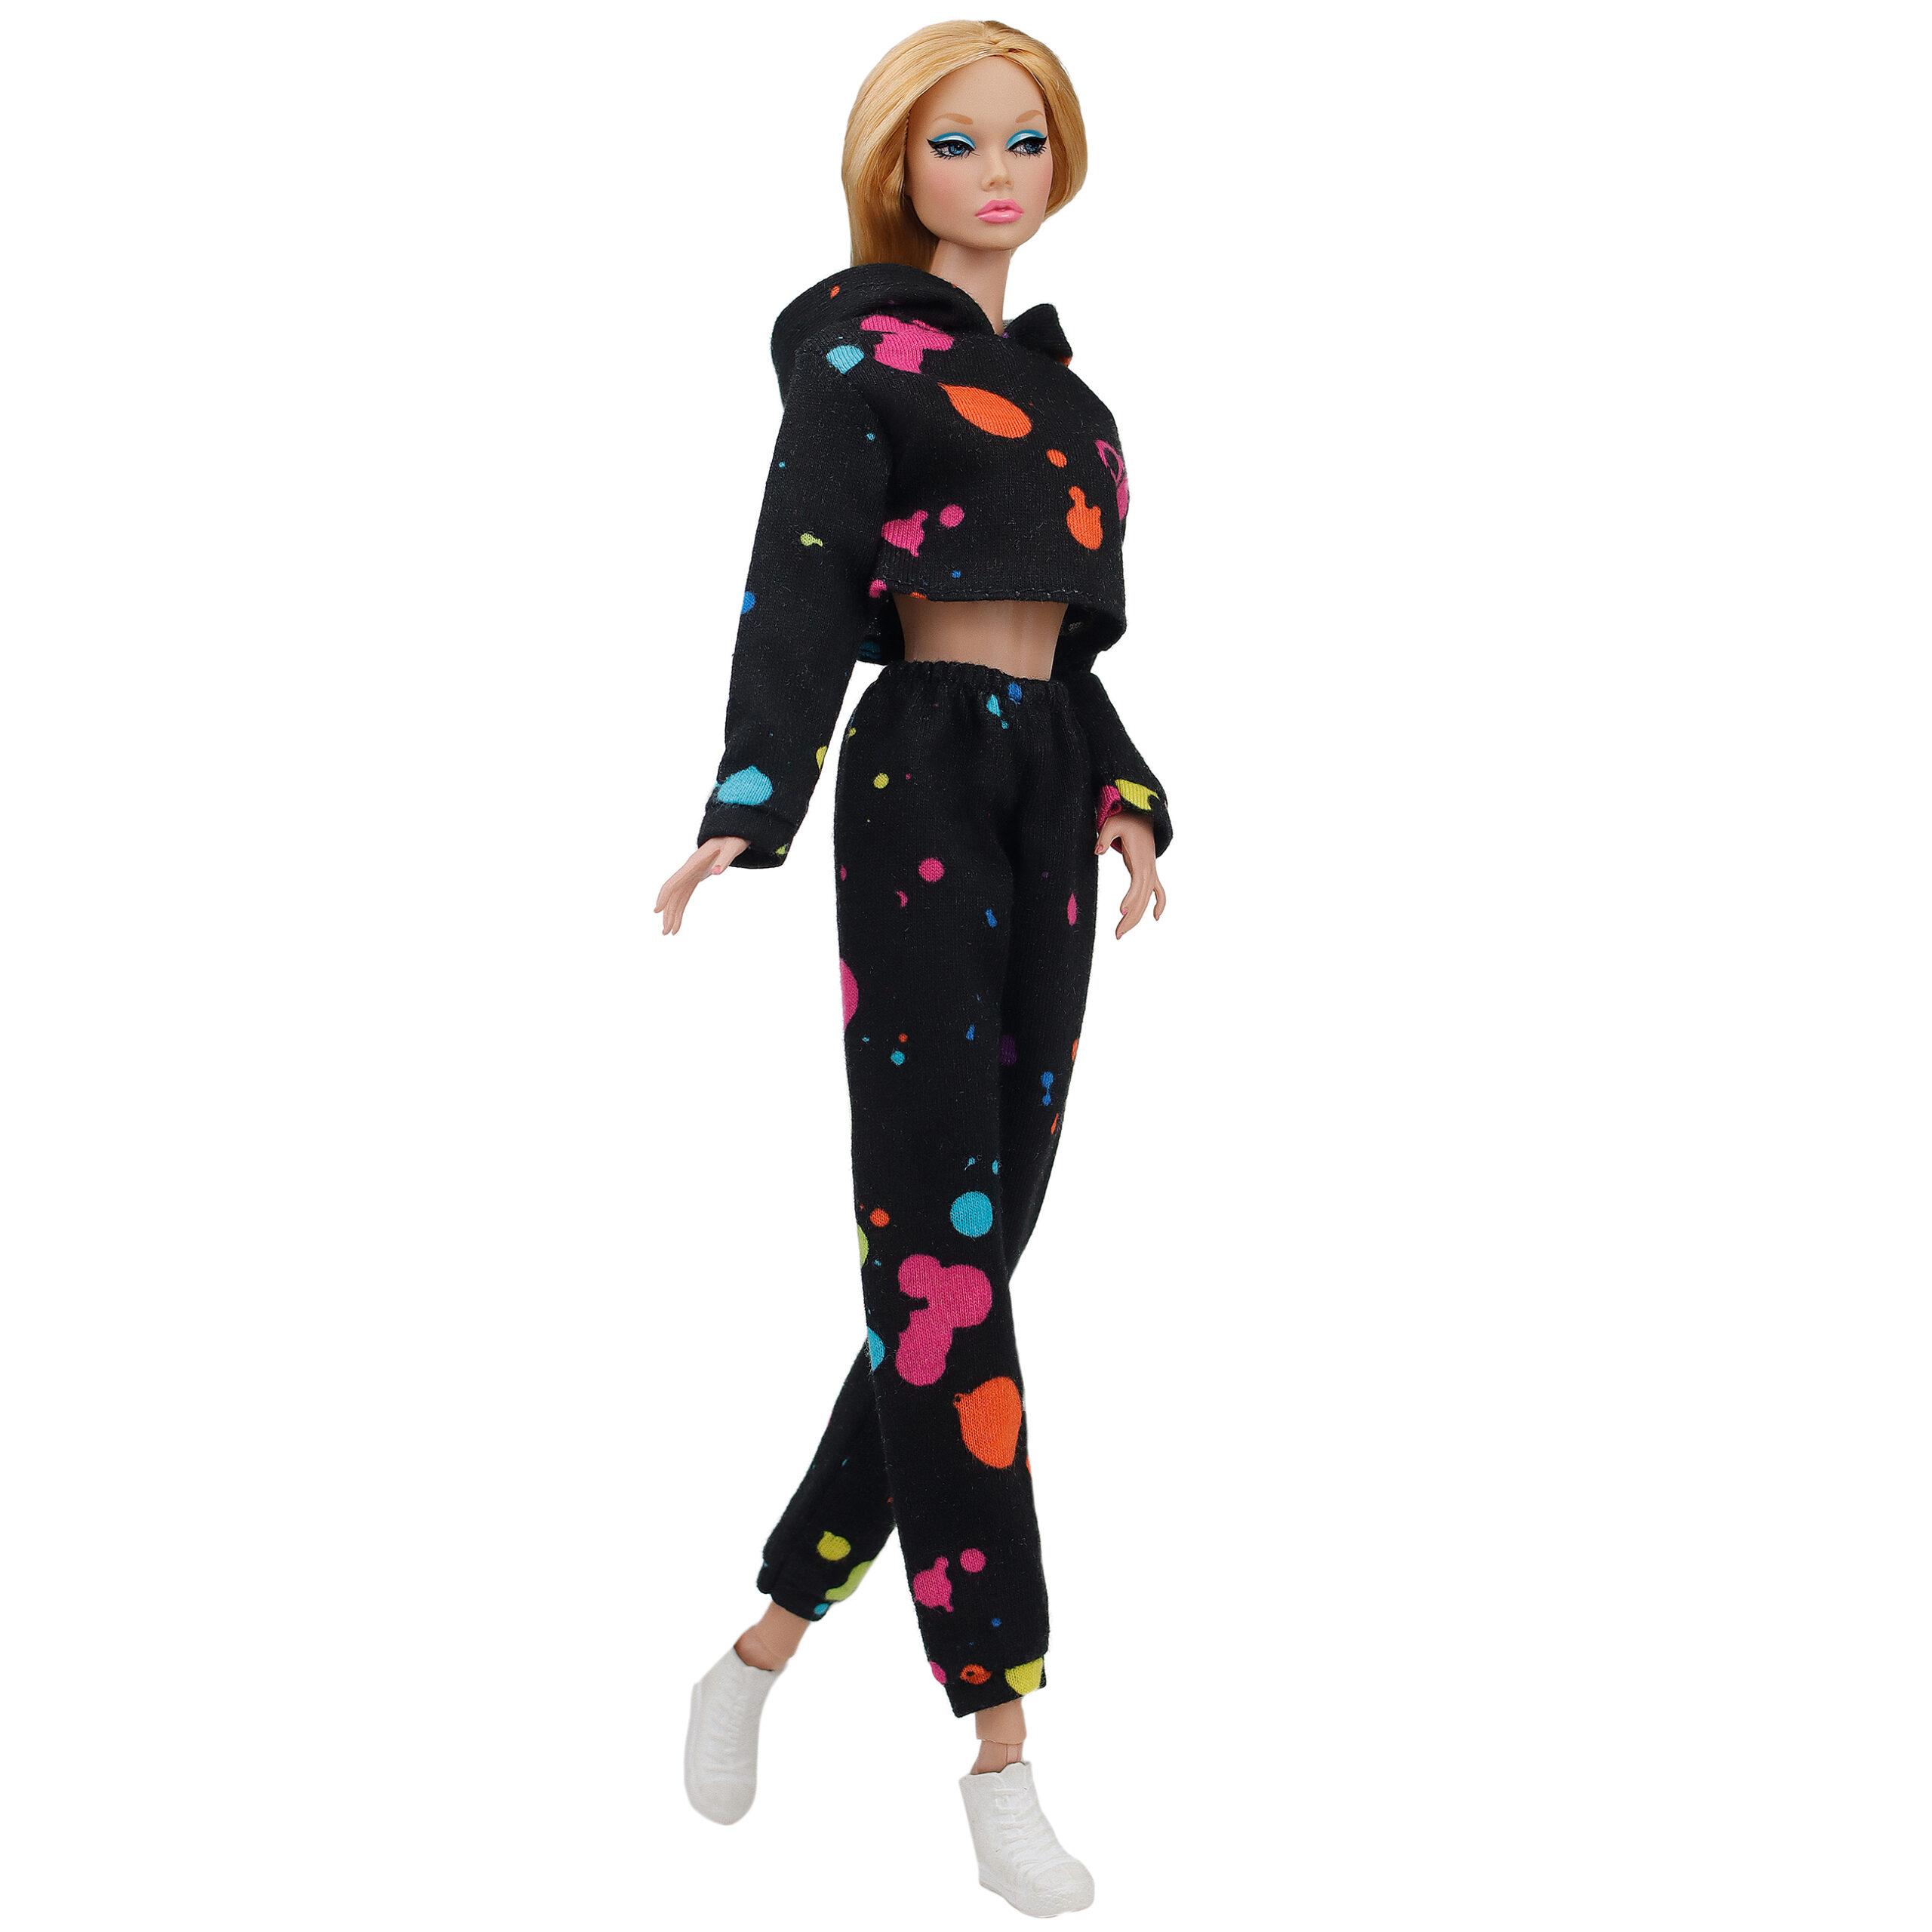 FA-027 Colorful printed tracksuit outfit for 11 1/2 Prime; Brb